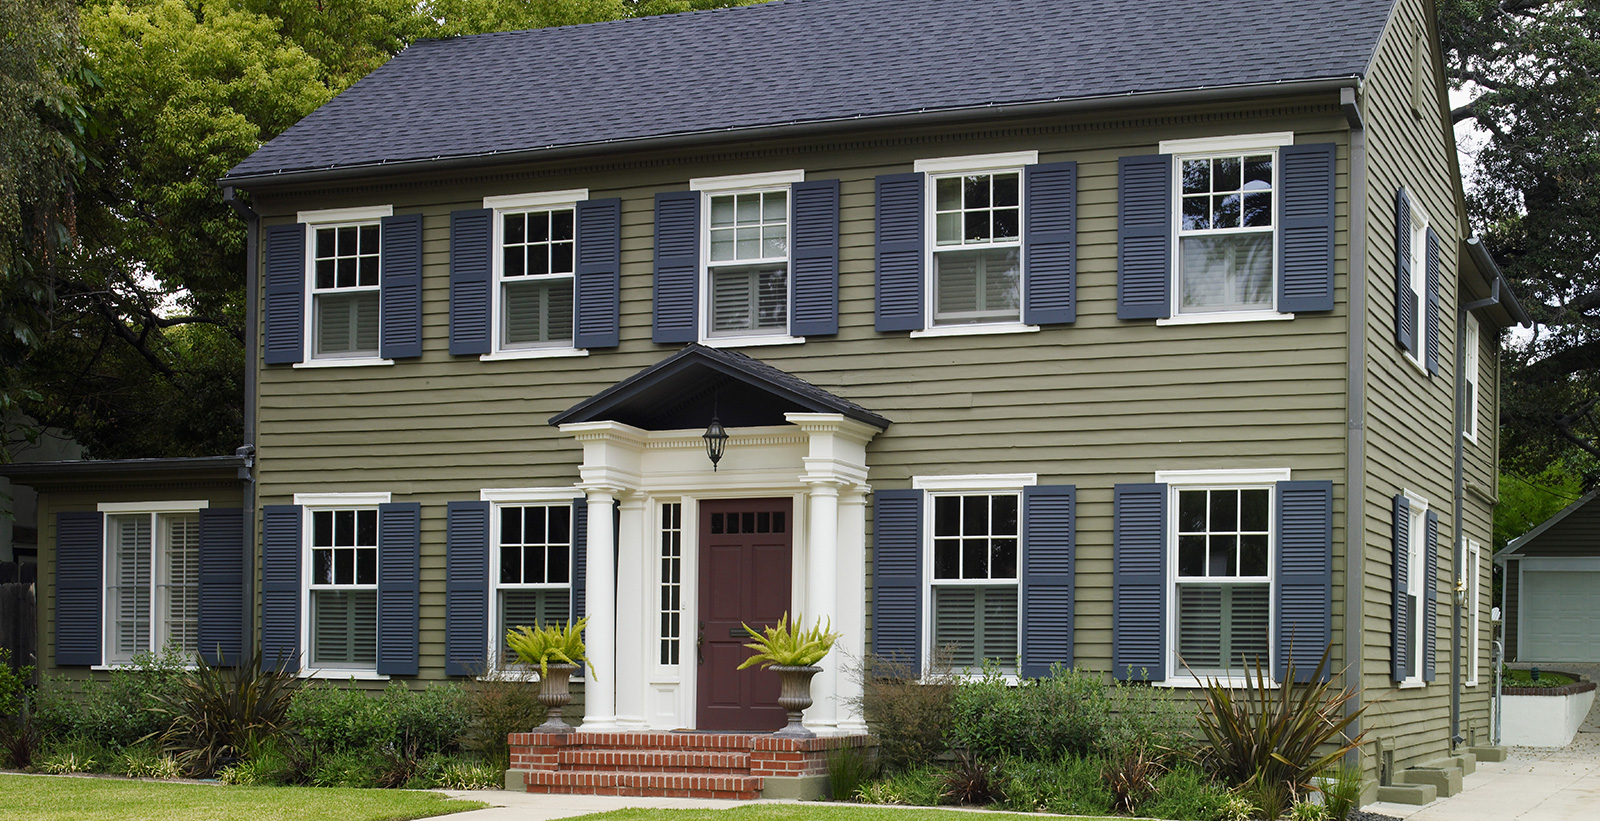 Colonial themed house with green walls, white trim, blue shutters and red door.